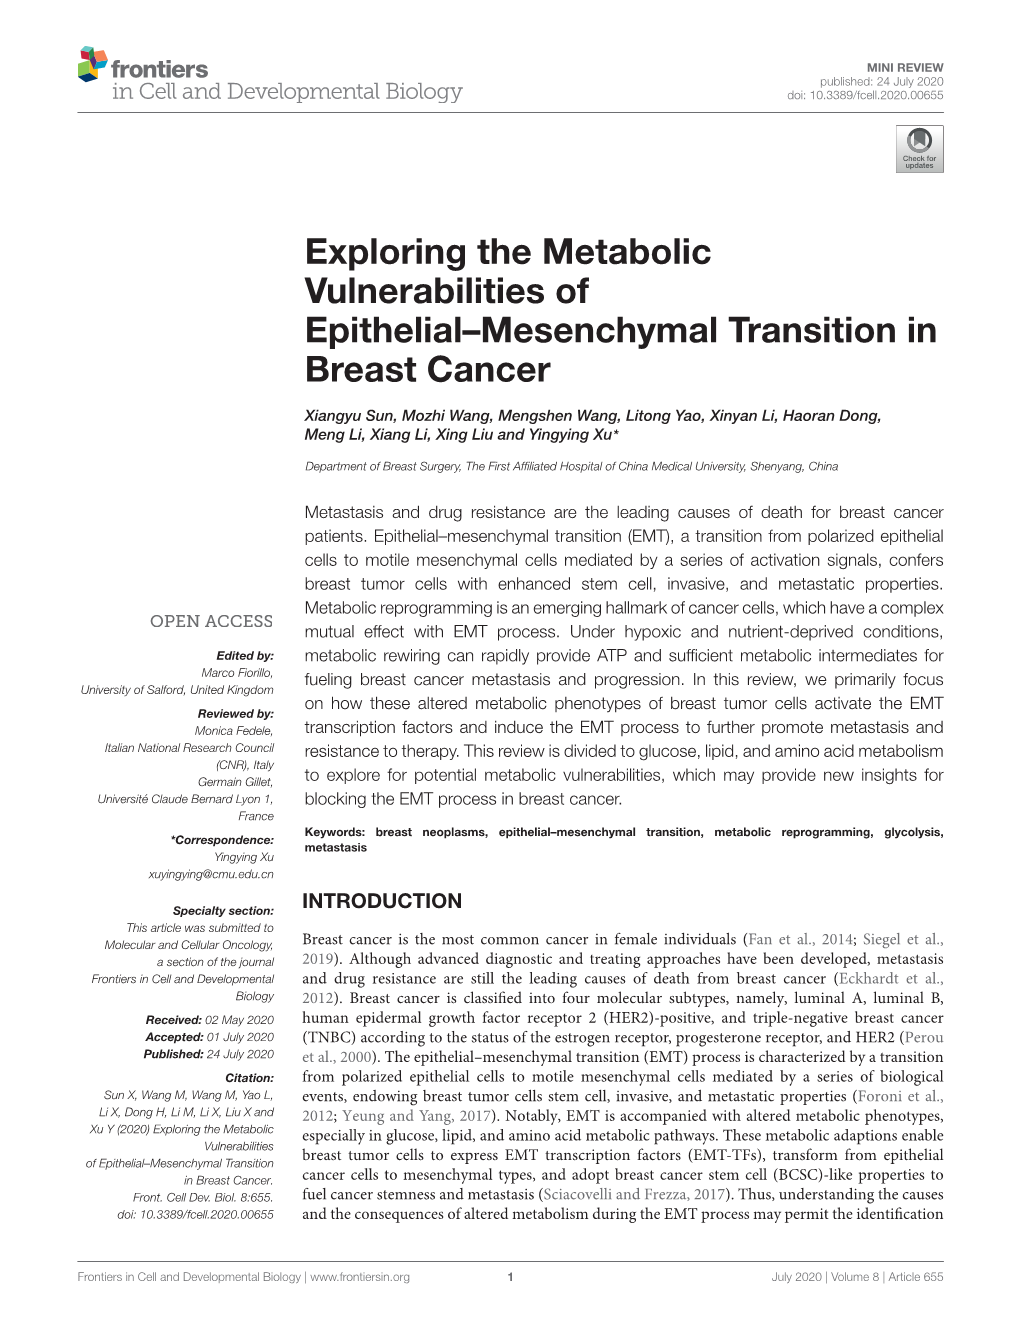 Exploring the Metabolic Vulnerabilities of Epithelial–Mesenchymal Transition in Breast Cancer